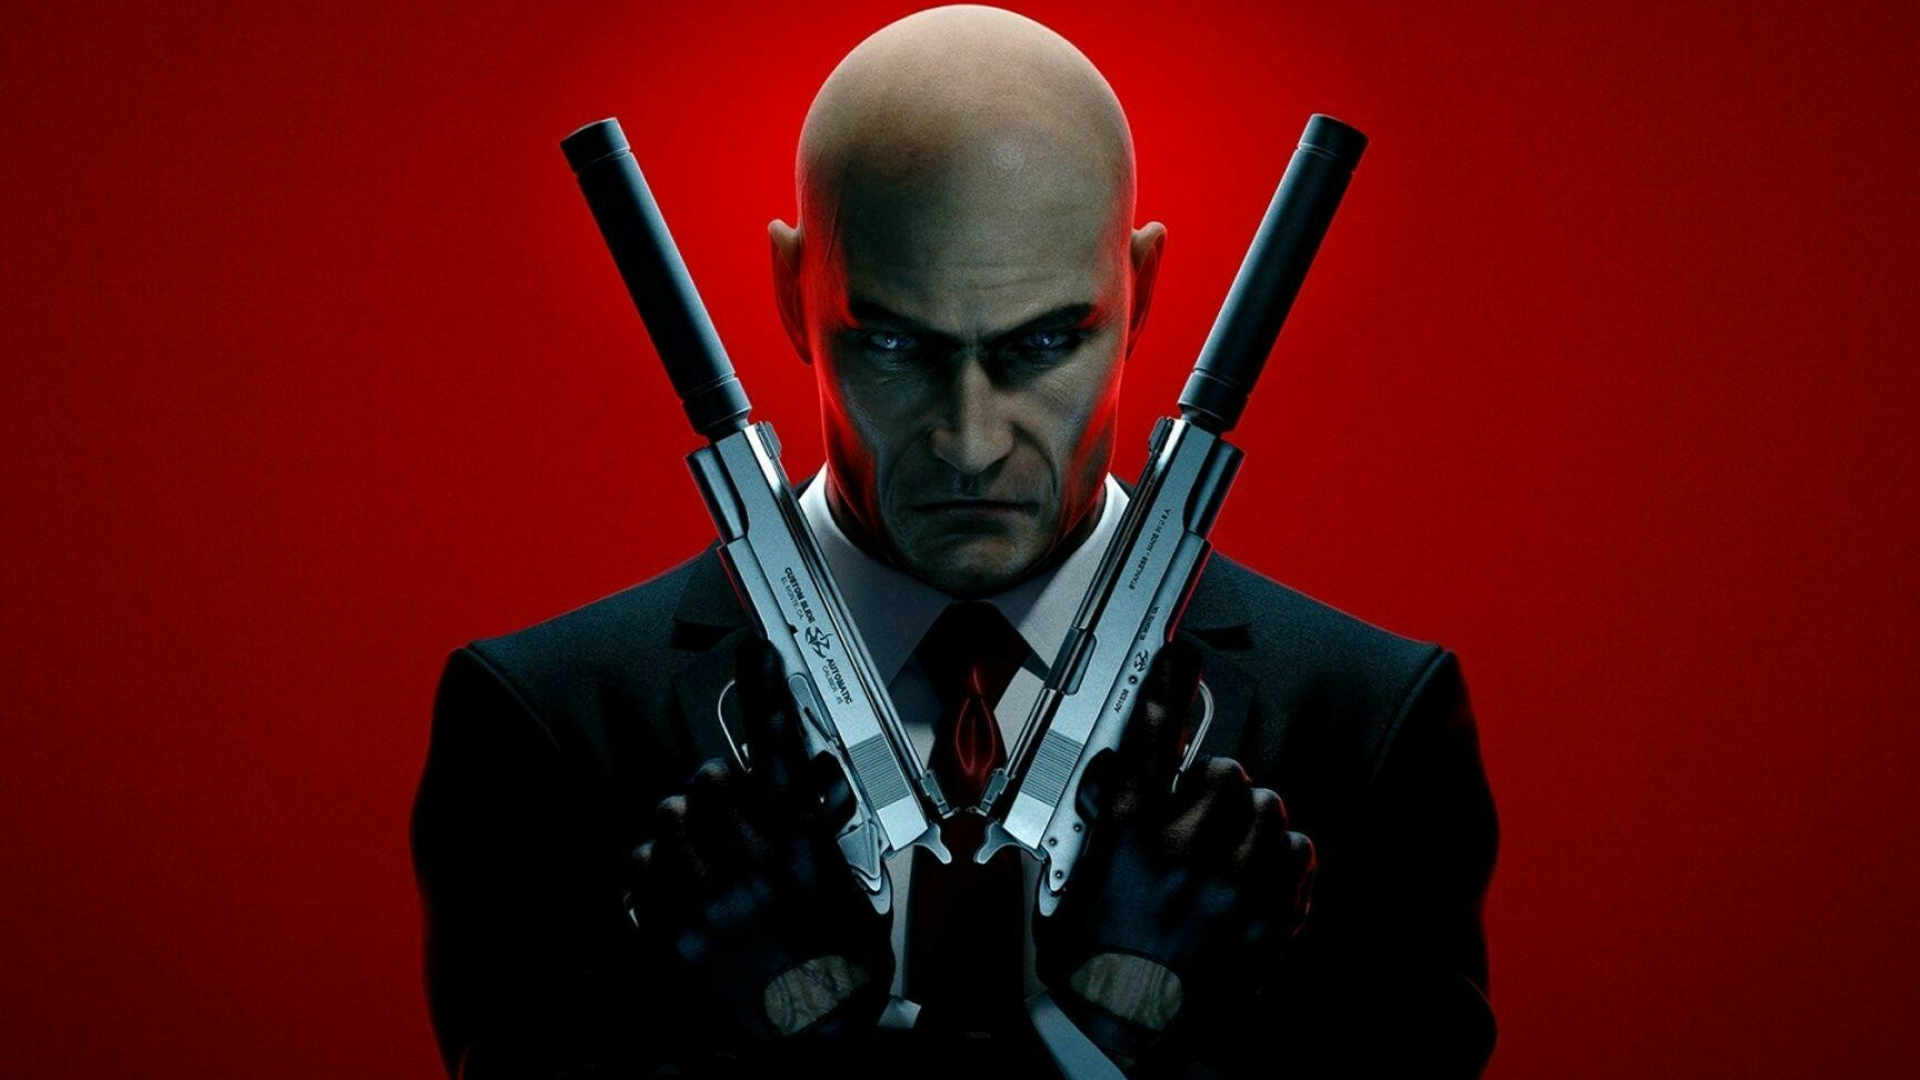 Hitman game, High-definition wallpapers, Stunning backgrounds, Gaming visuals, 1920x1080 Full HD Desktop